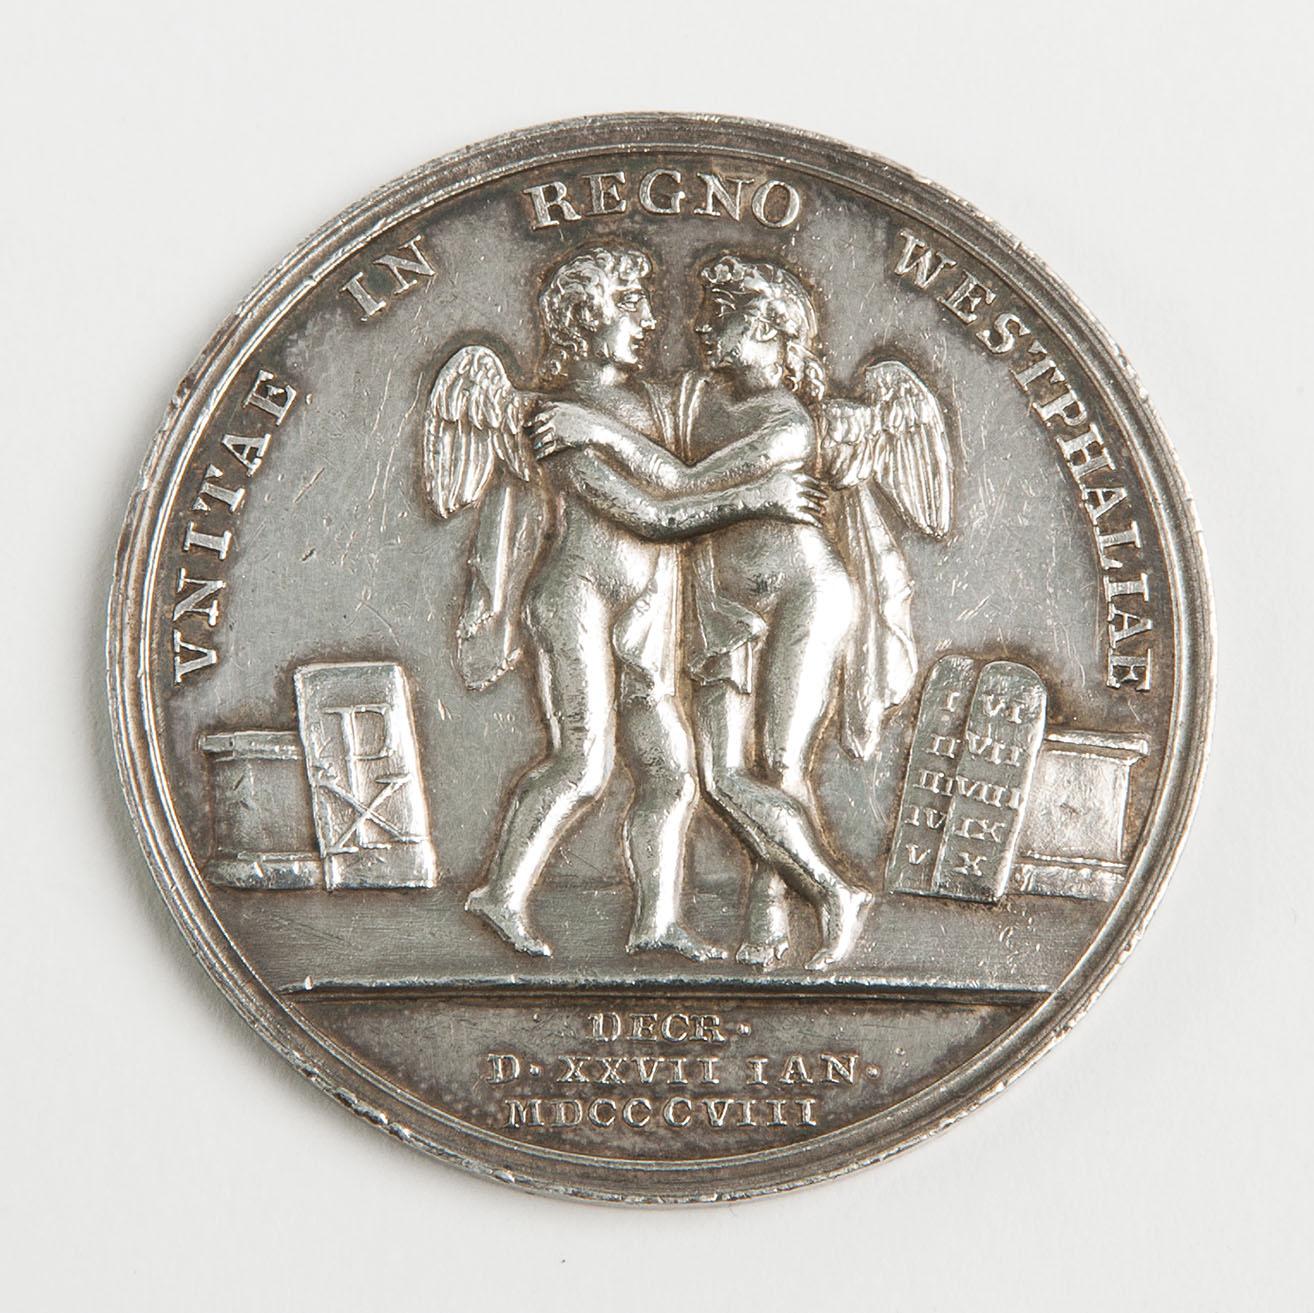 Medal featuring two angels embracing and Latin text around. 